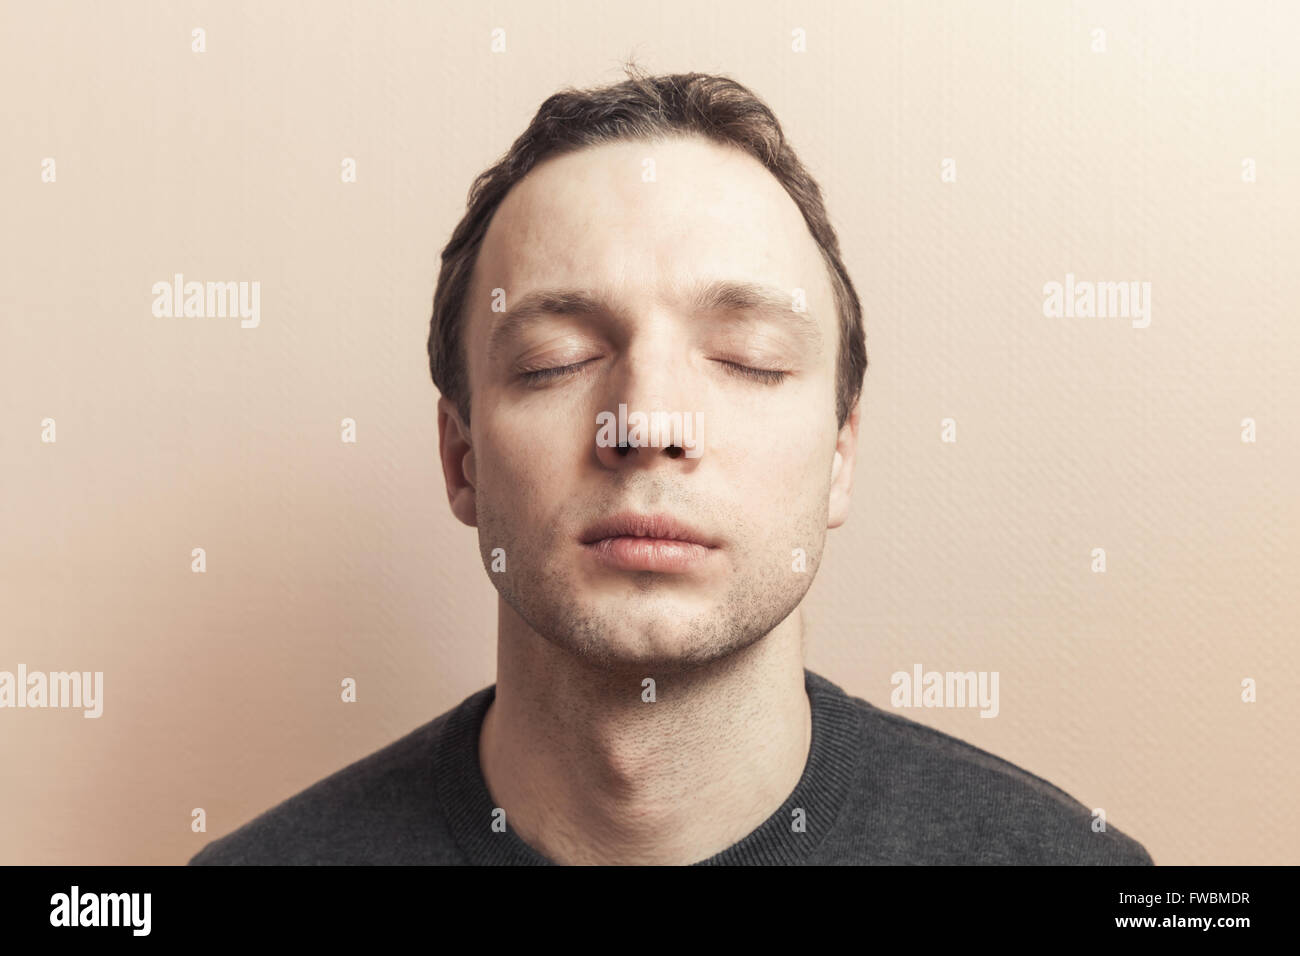 Young Caucasian man with closed eyes. Studio portrait over gray wall background, old style photo filter tonal correction effect Stock Photo